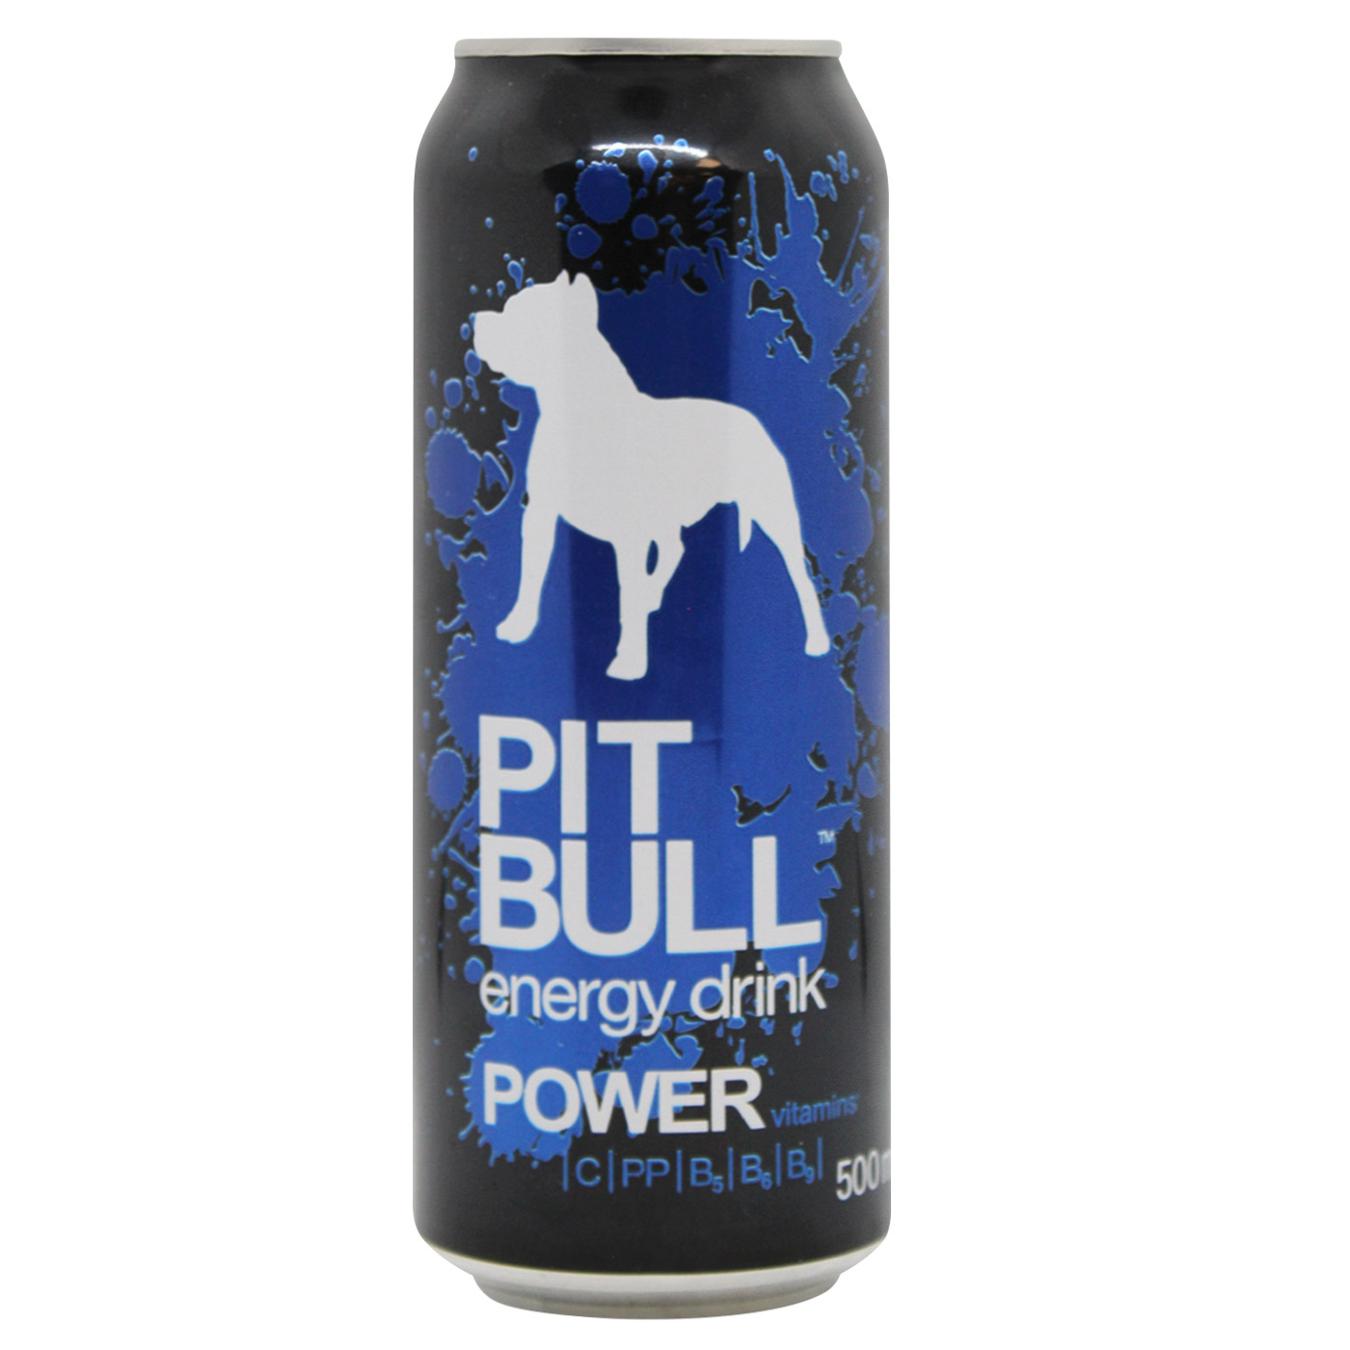 Energy drink Pit Bull Power 0.5 l iron can